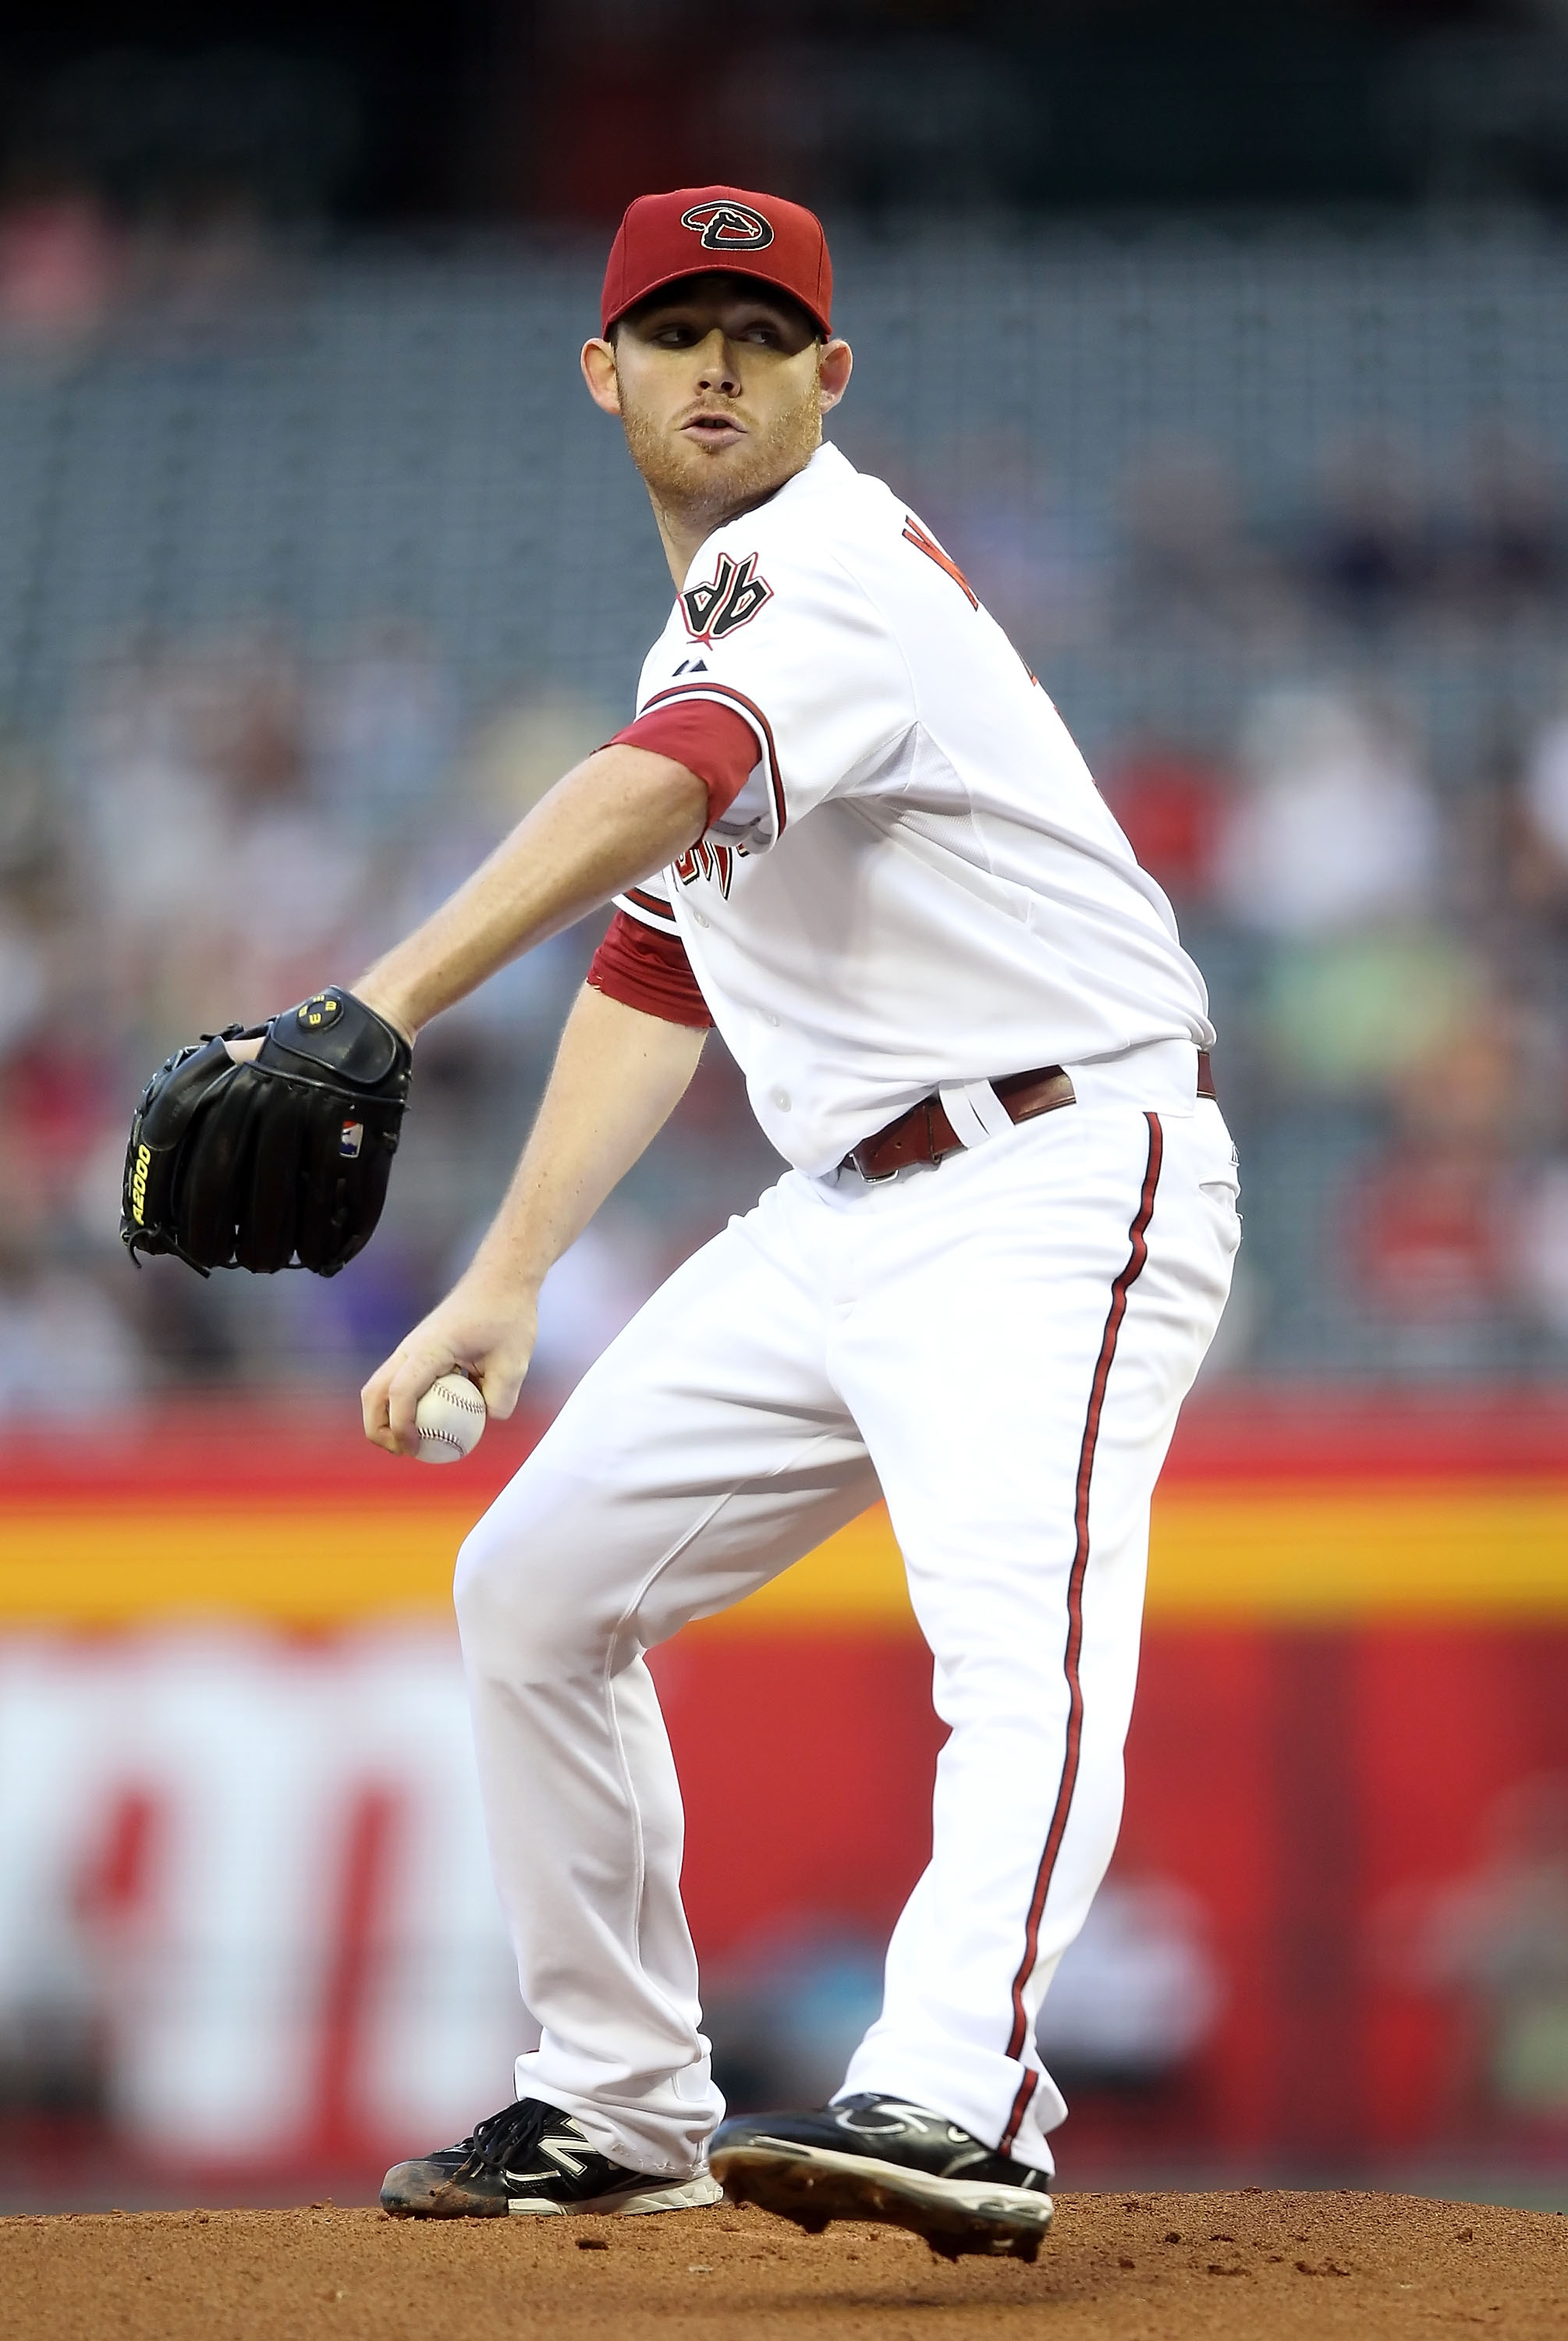 The Diamondbacks need more than just Ian Kennedy to pitch well.